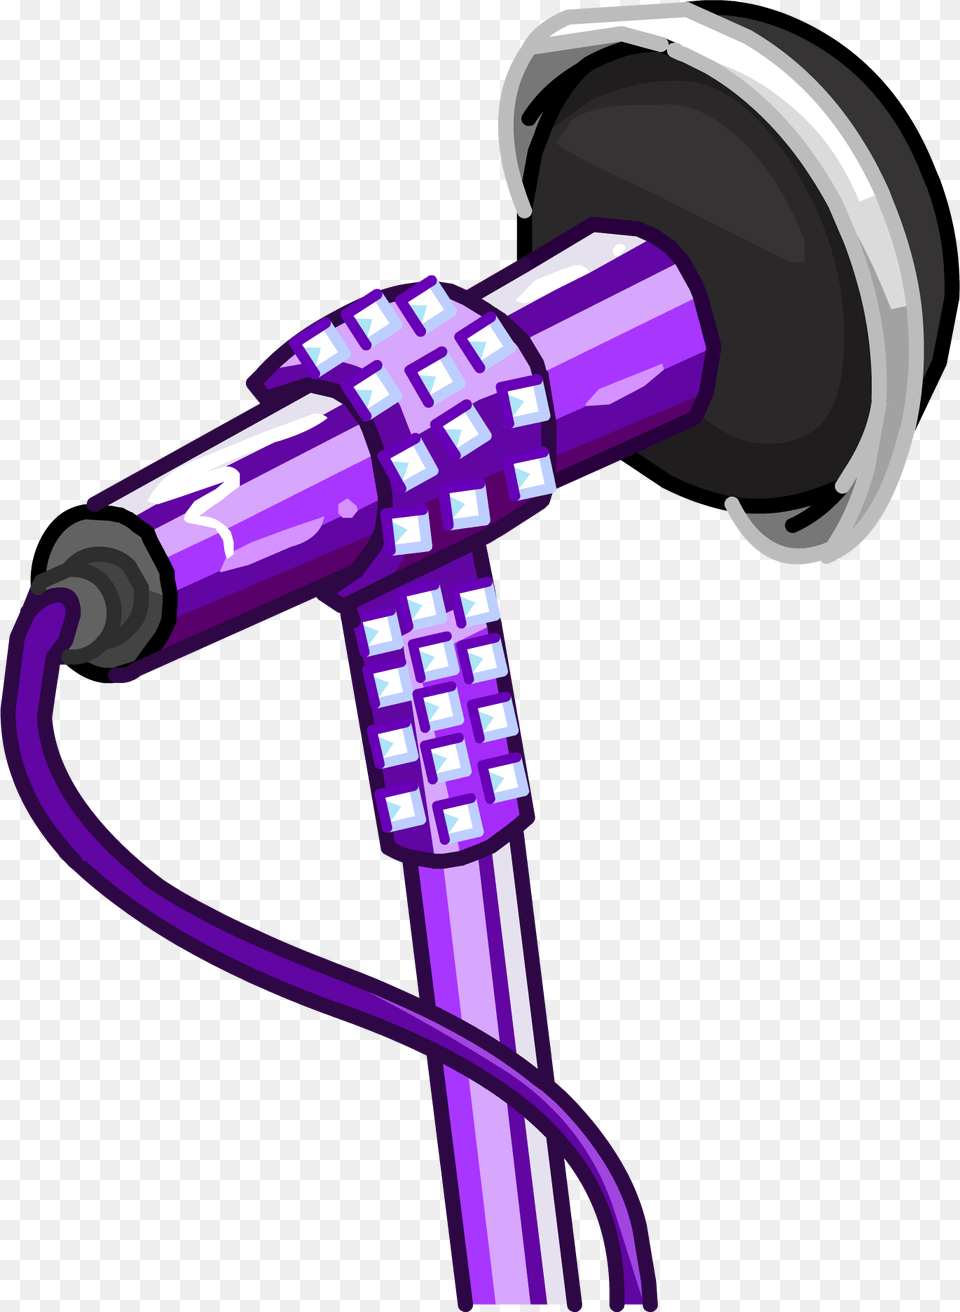 Microphone Glitter Club Penguin Microphone, Electrical Device, Purple, Device, Gas Pump Png Image